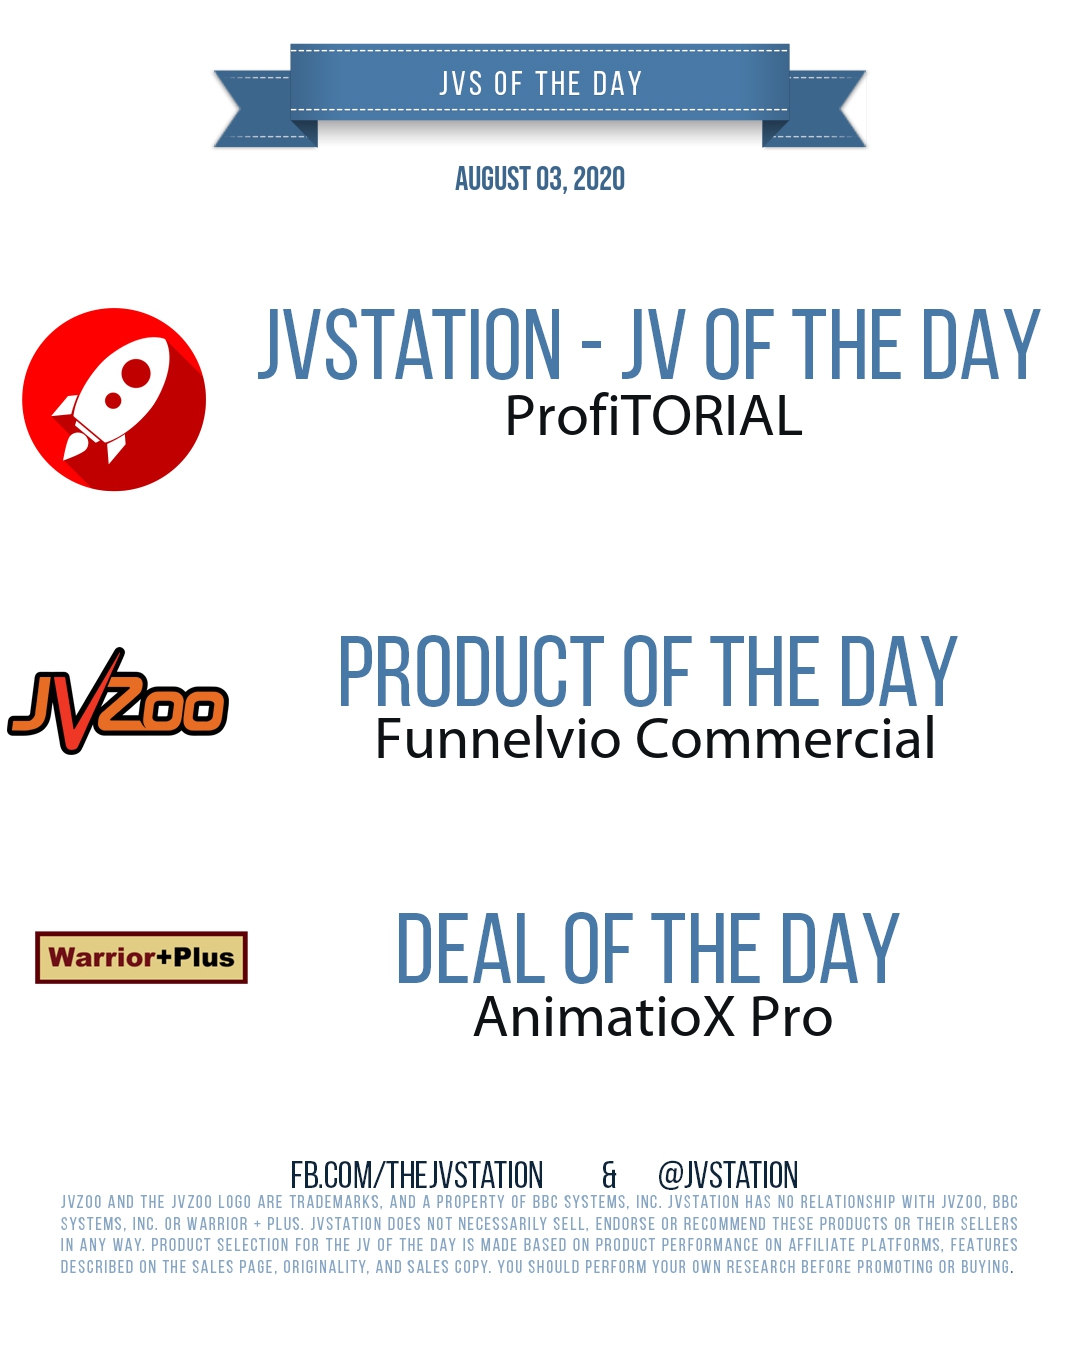 JVs of the day - August 03, 2020